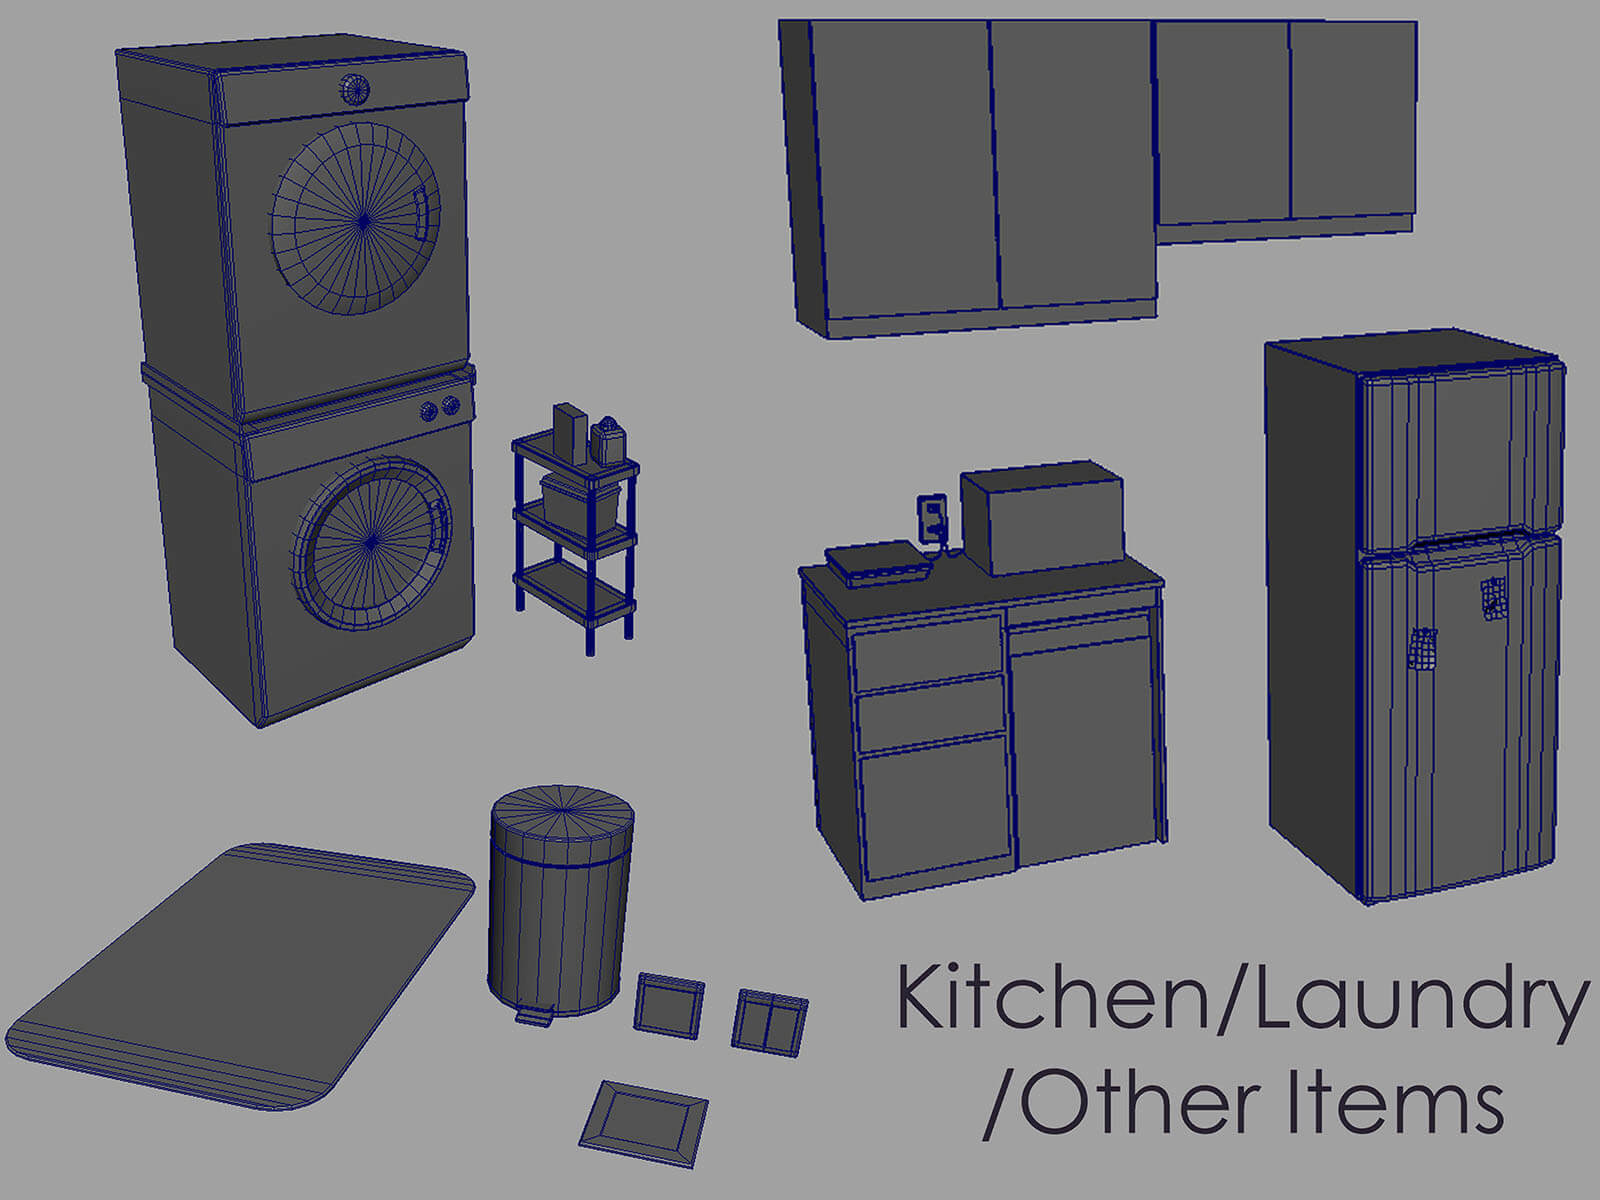 Collection of untextured 3D objects used in the scene's kitchen and laundry area.